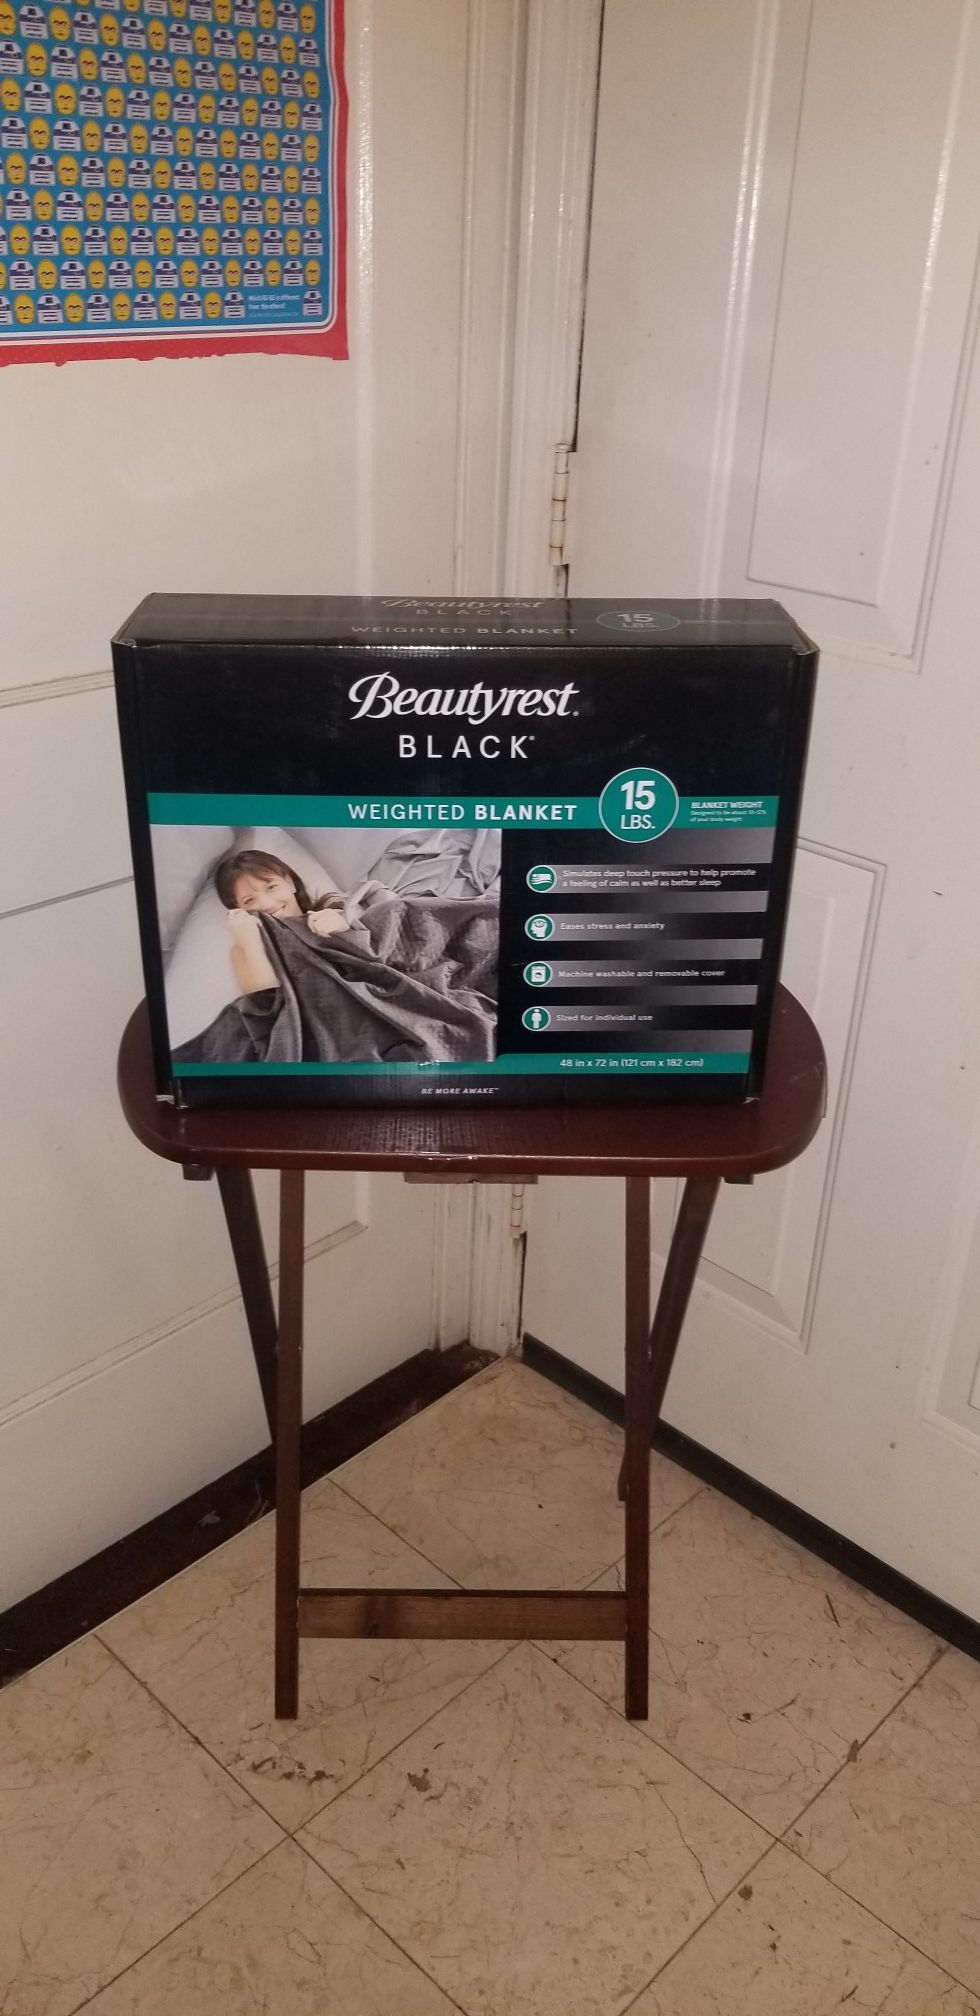 Beauty rest 15 lb Weighted blanket